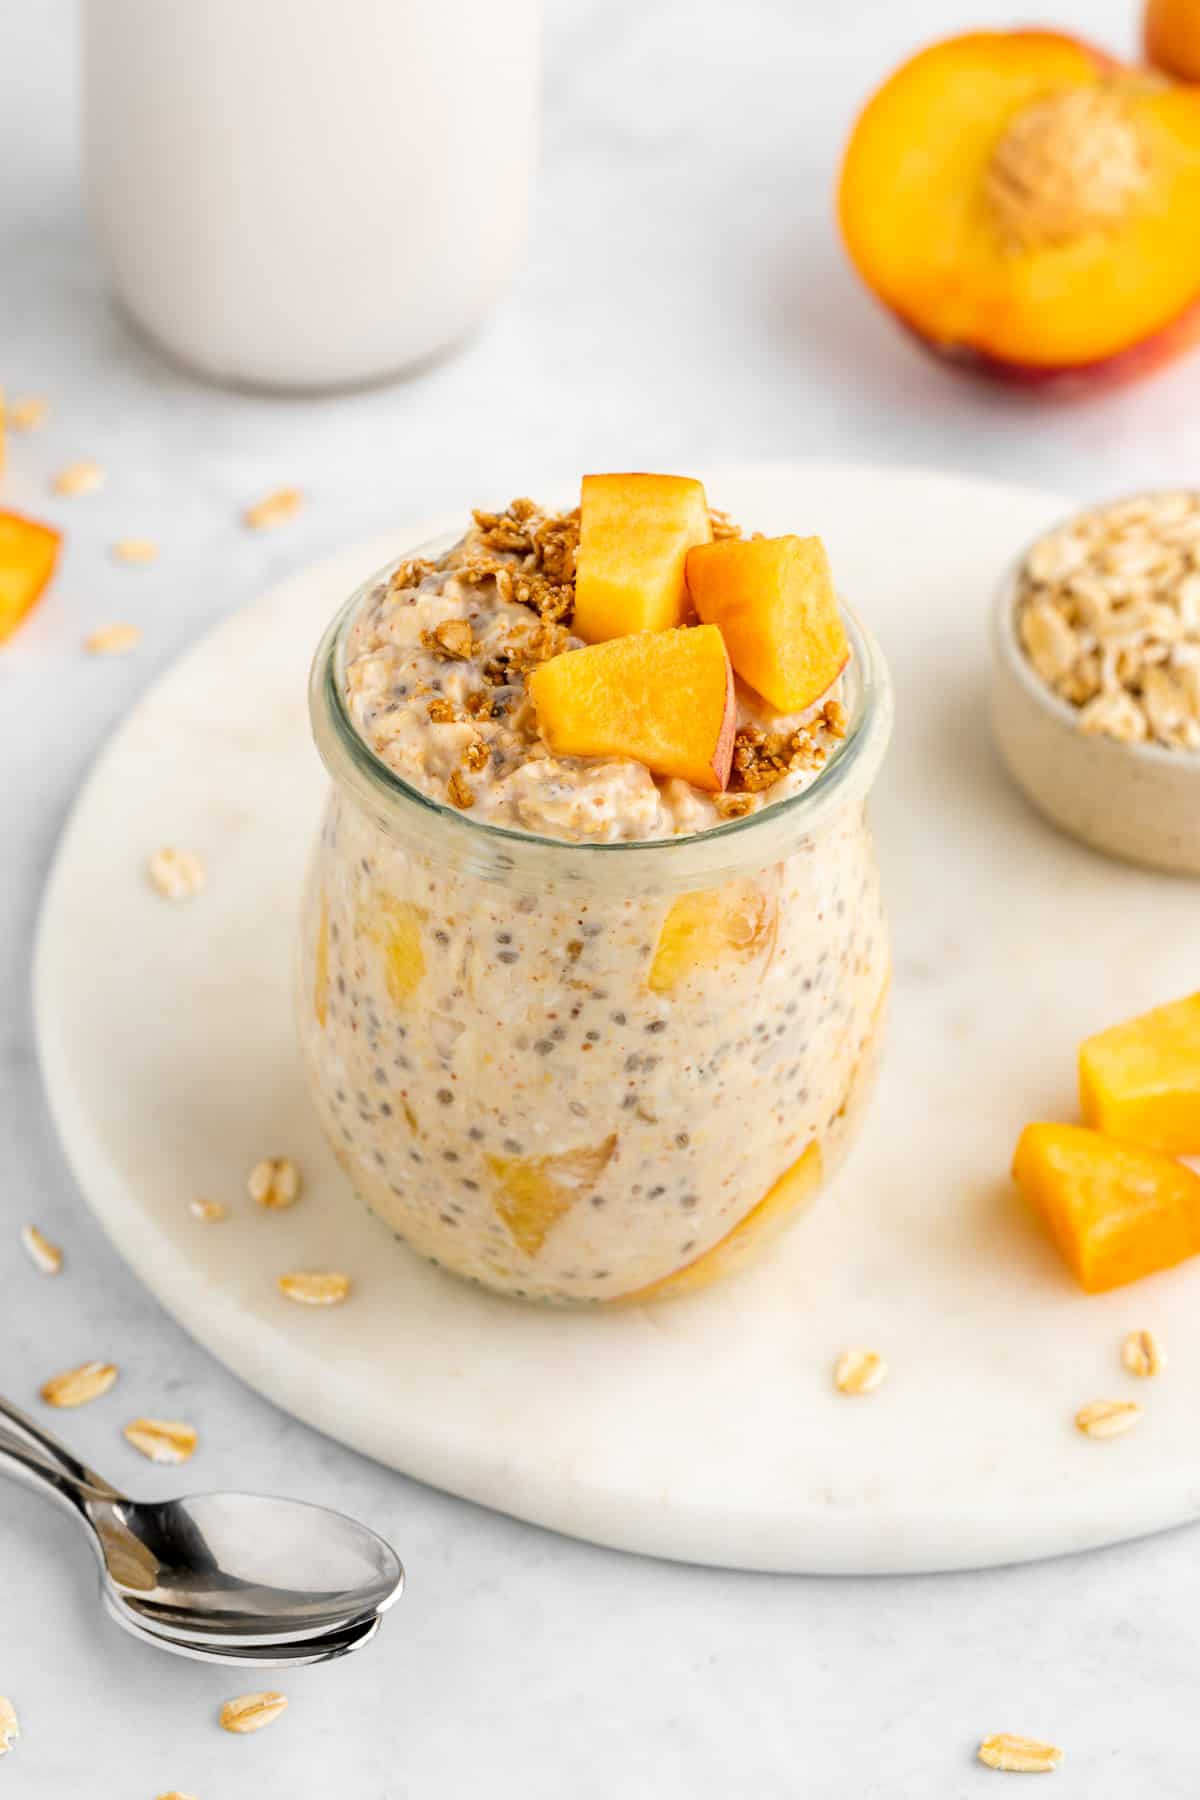 https://www.purelykaylie.com/wp-content/uploads/2023/01/peaches-and-cream-overnight-oats-4.jpg